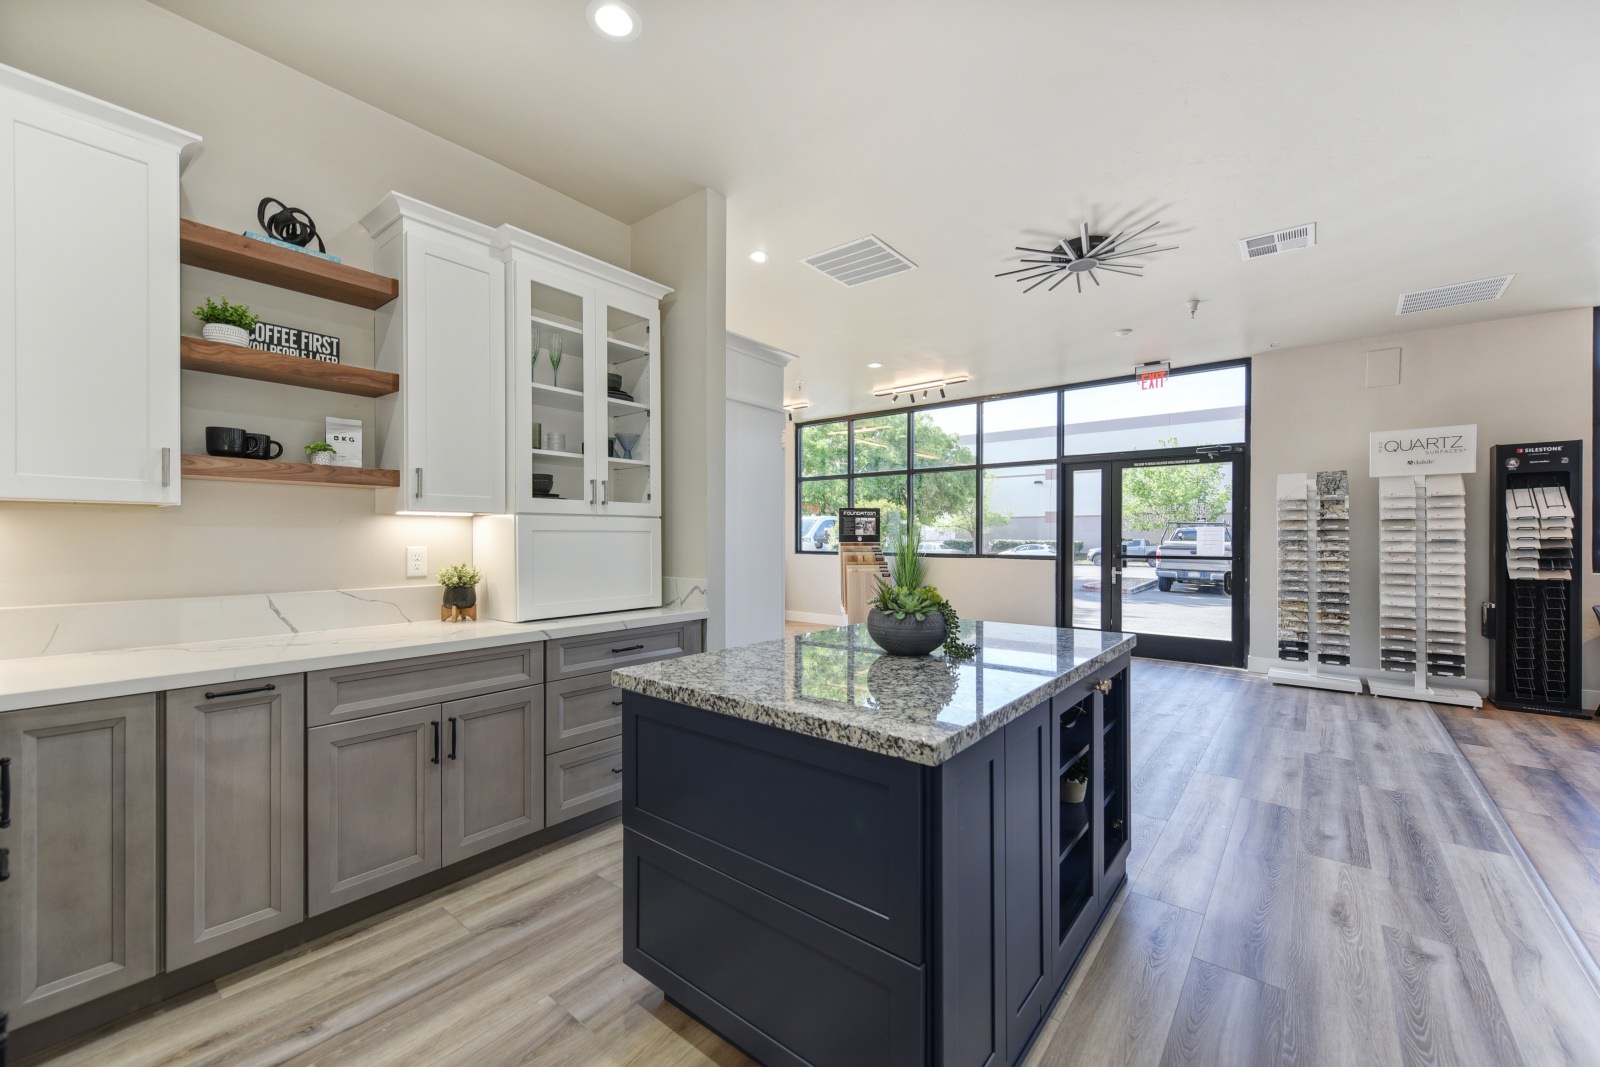 Dry Creek Construction's showroom featuring custom cabinets and a kitchen island